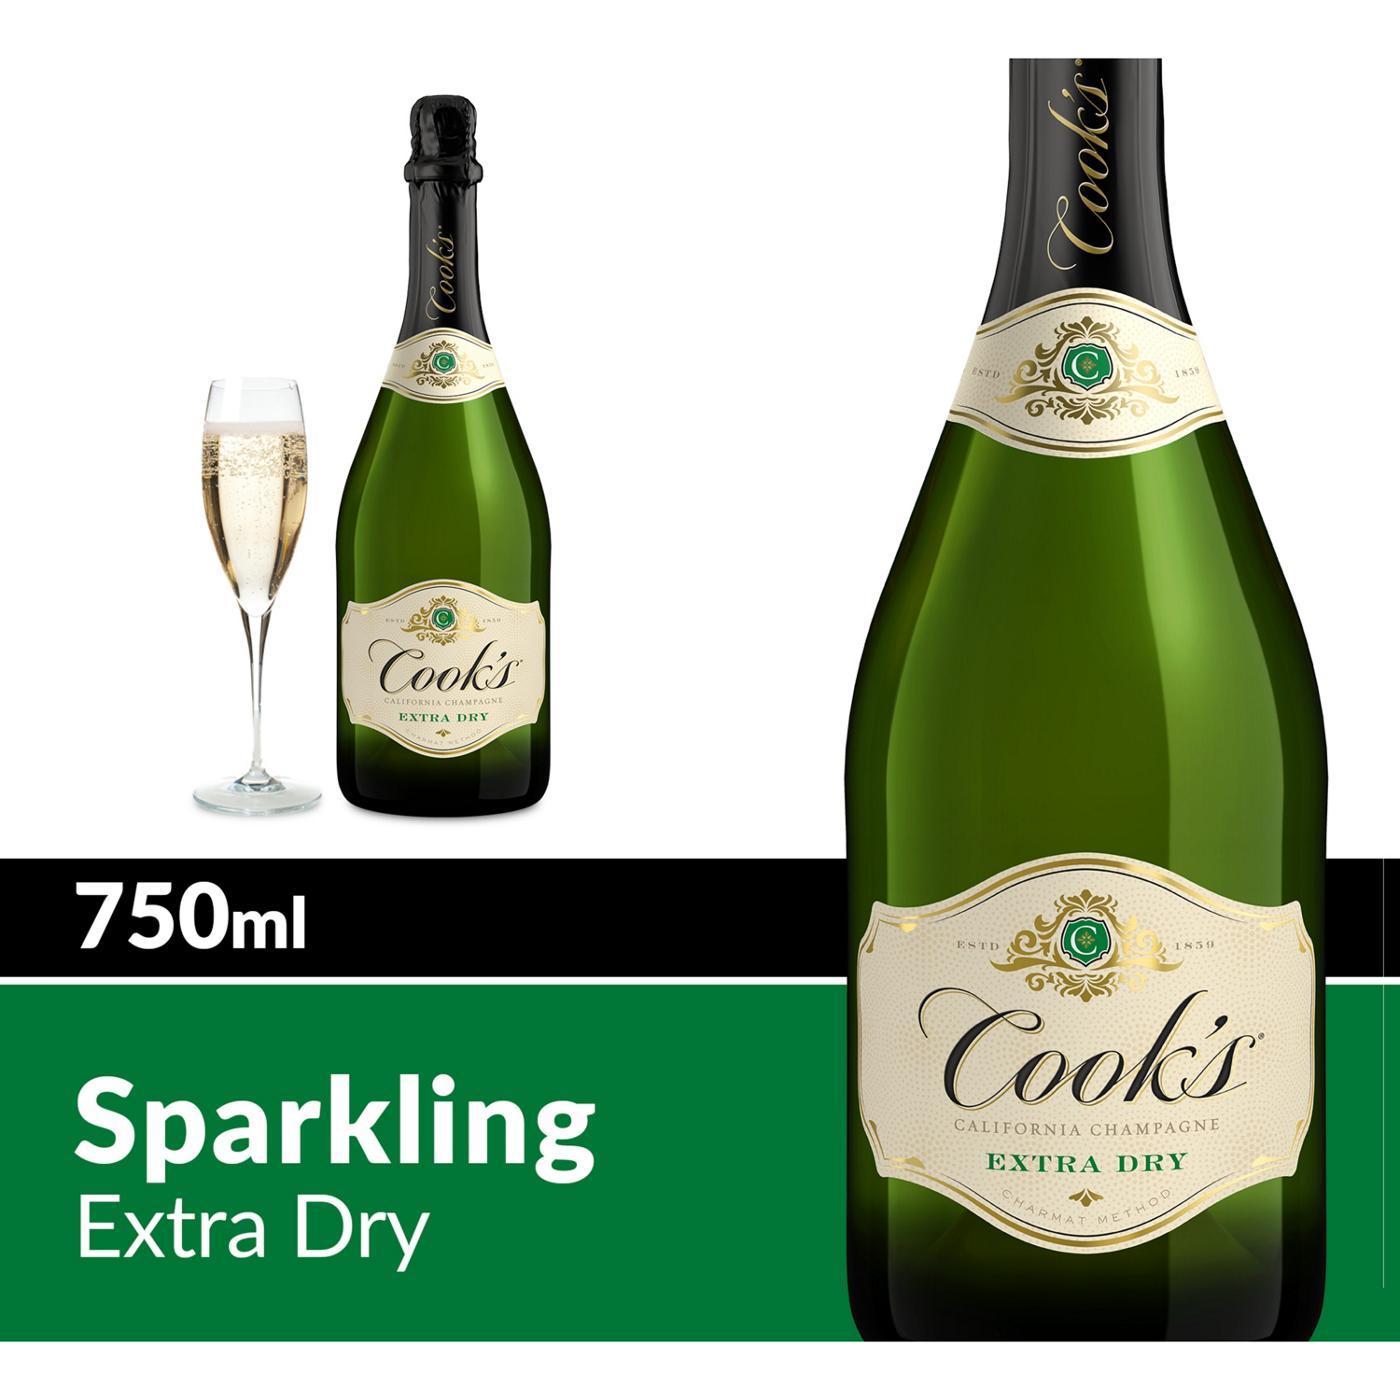 Cook's California Champagne Extra Dry White Sparkling Wine Bottle; image 5 of 6